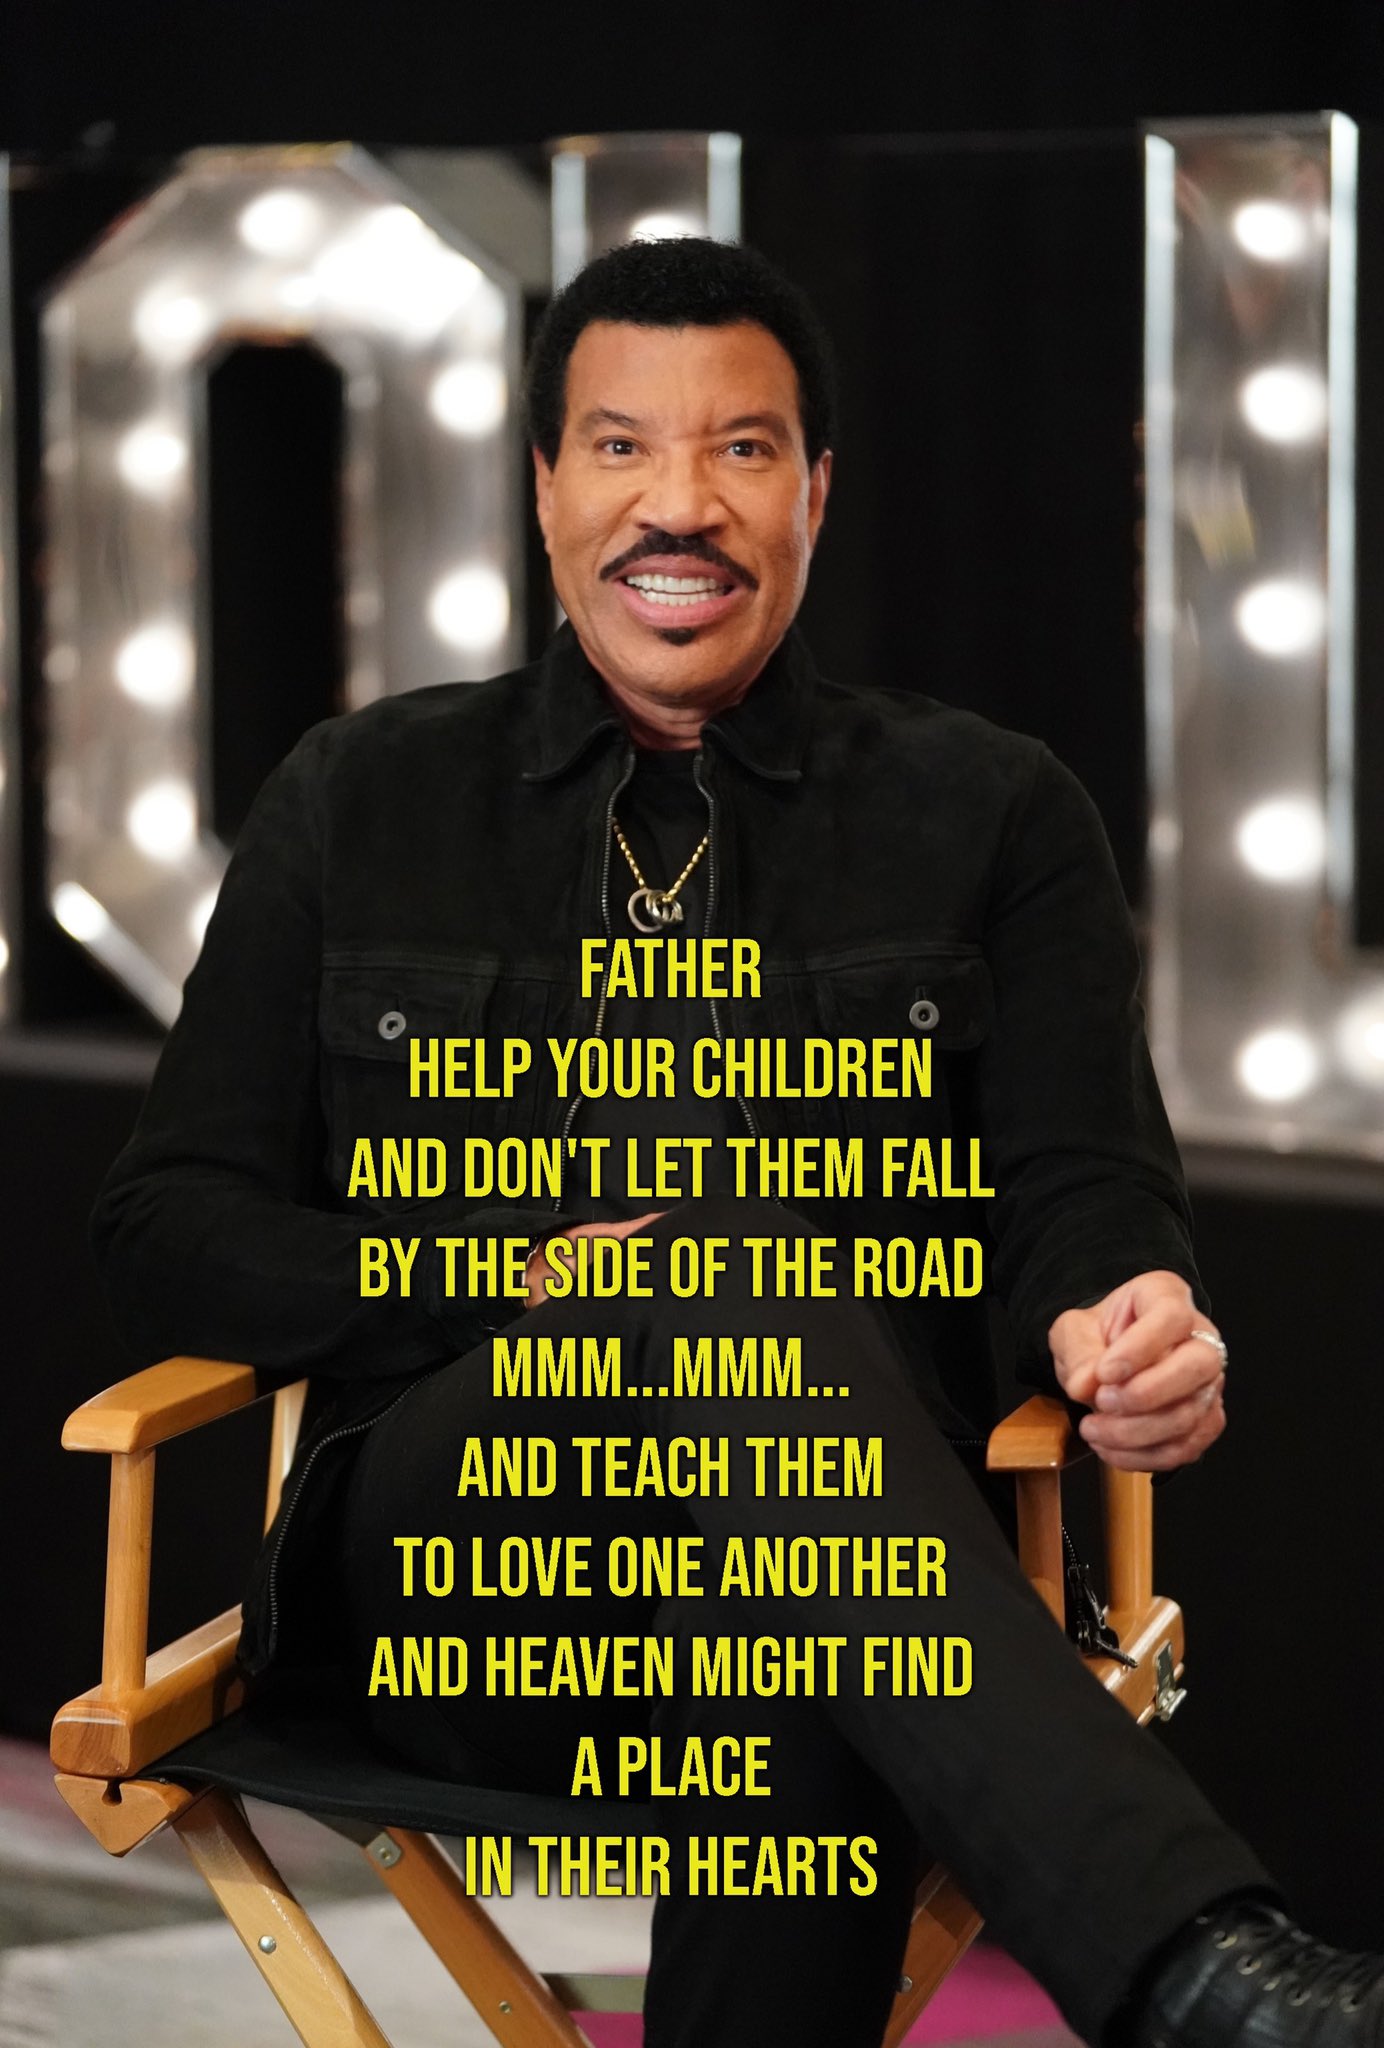  Jesus is Love by The Commodores. Happy Birthday to the one and only Lionel Richie! 